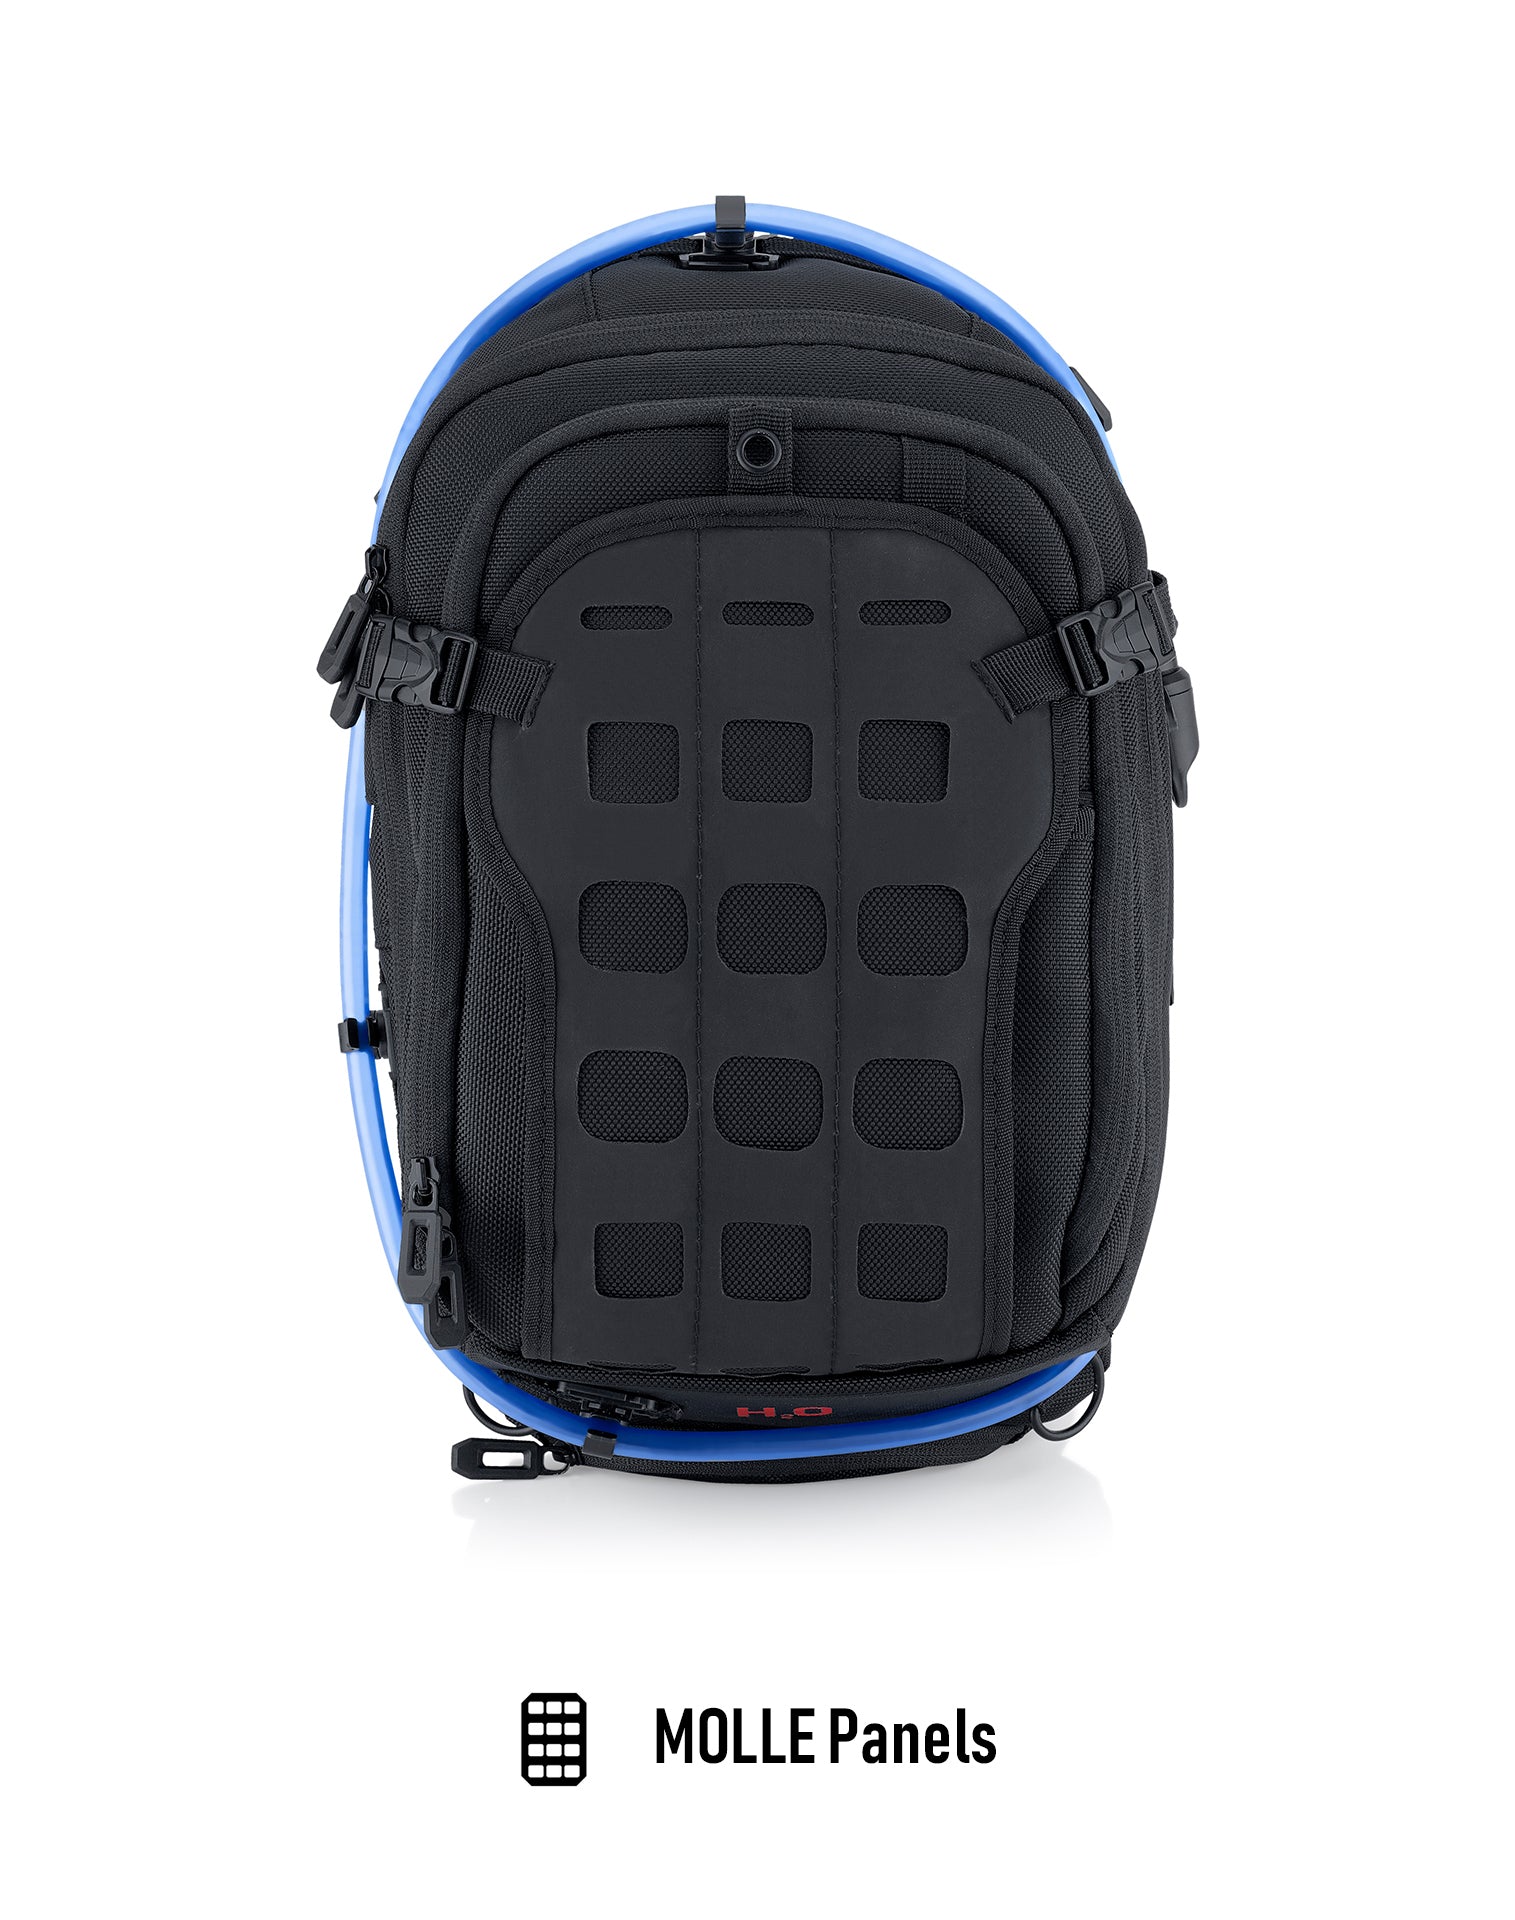 Viking Apex Suzuki ADV Touring Backpack with Hydration Pack